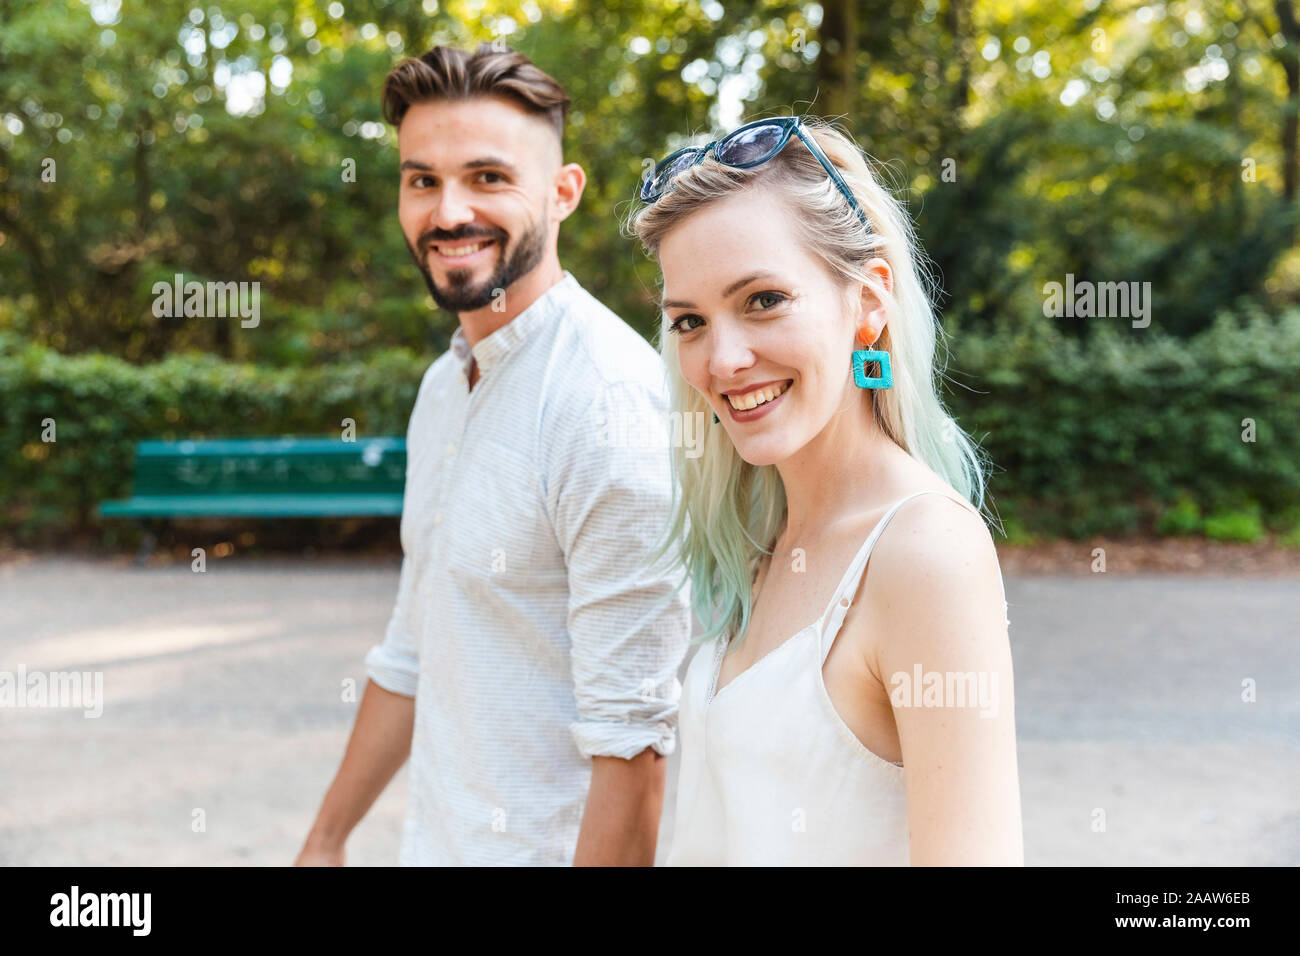 Portrait of happy young couple walking in a park Banque D'Images